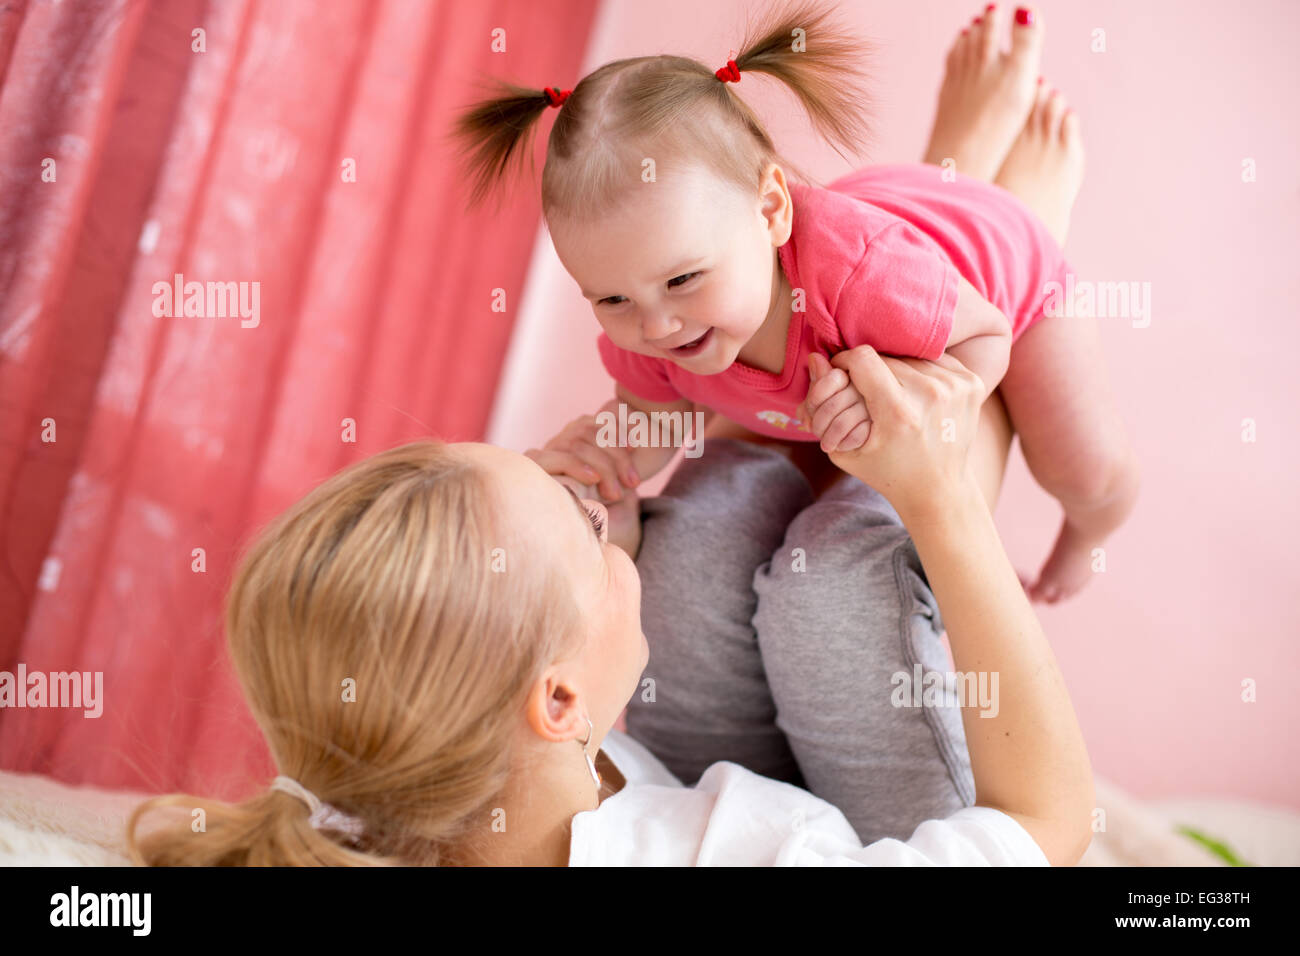 Young mother holding baby, fun, exercise, leisure Stock Photo